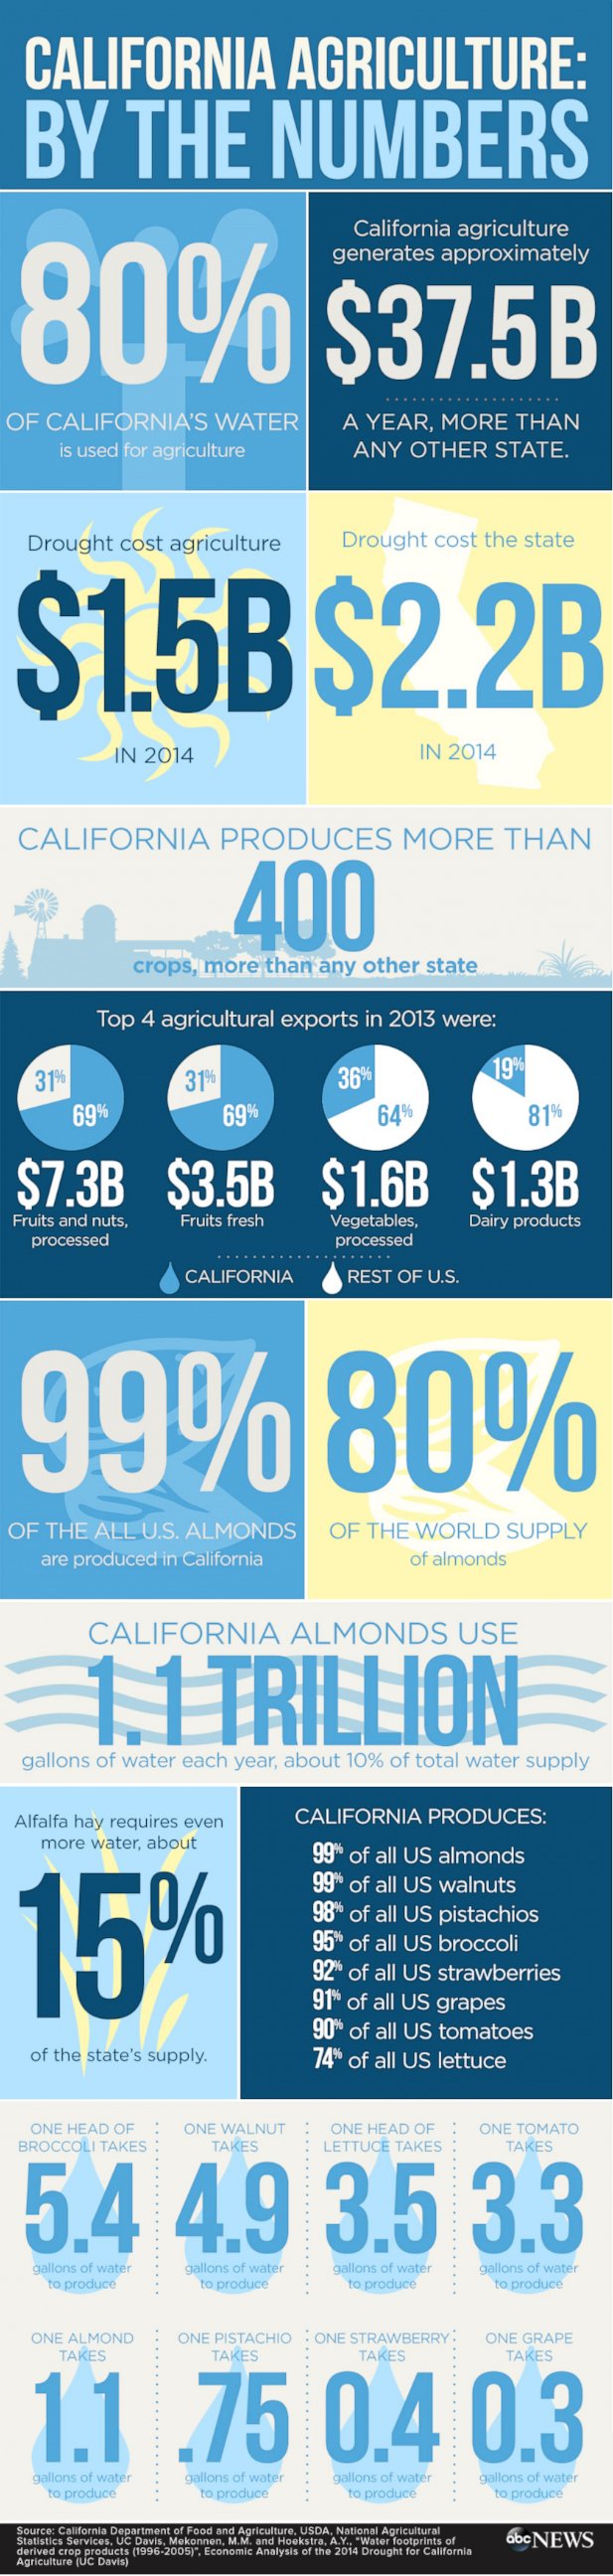 990_CA_AGRICULTURE_BTN_infographic_150406_02